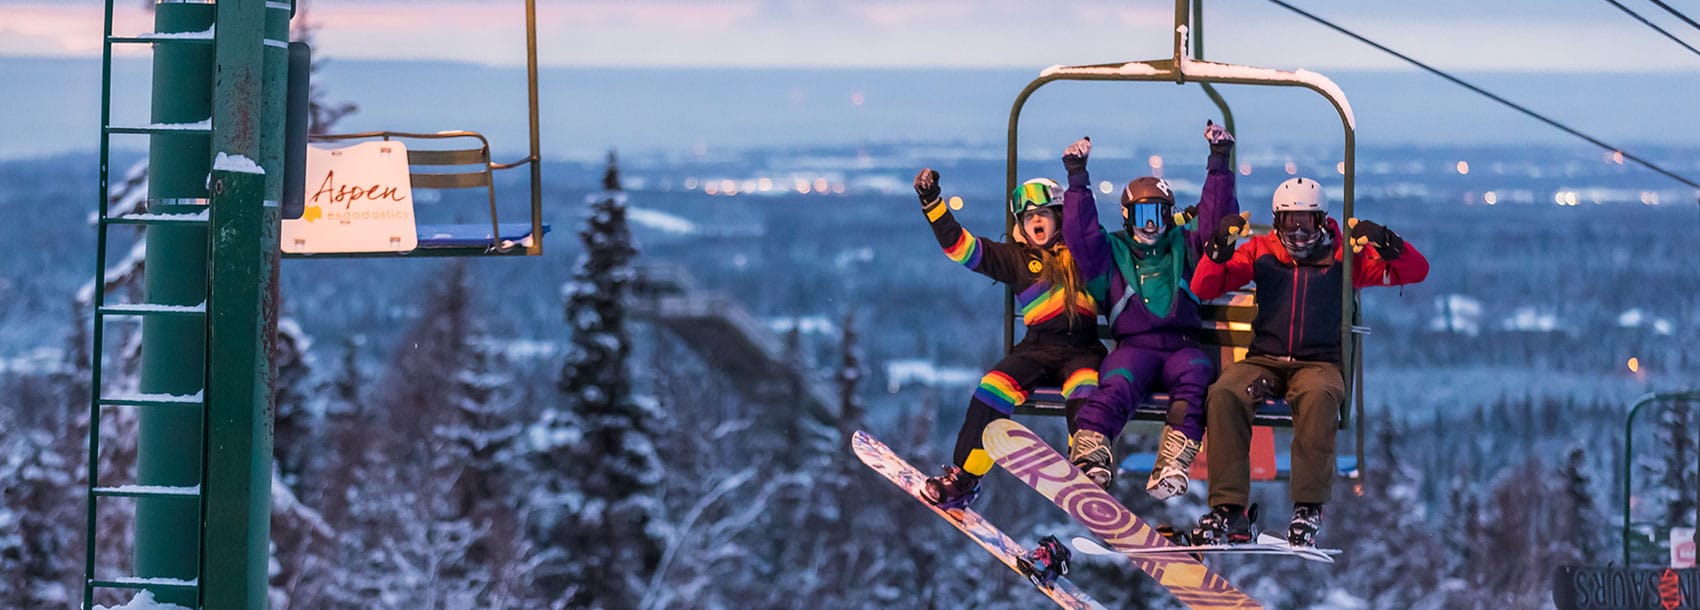 Three friends on the ski lift showing excitement